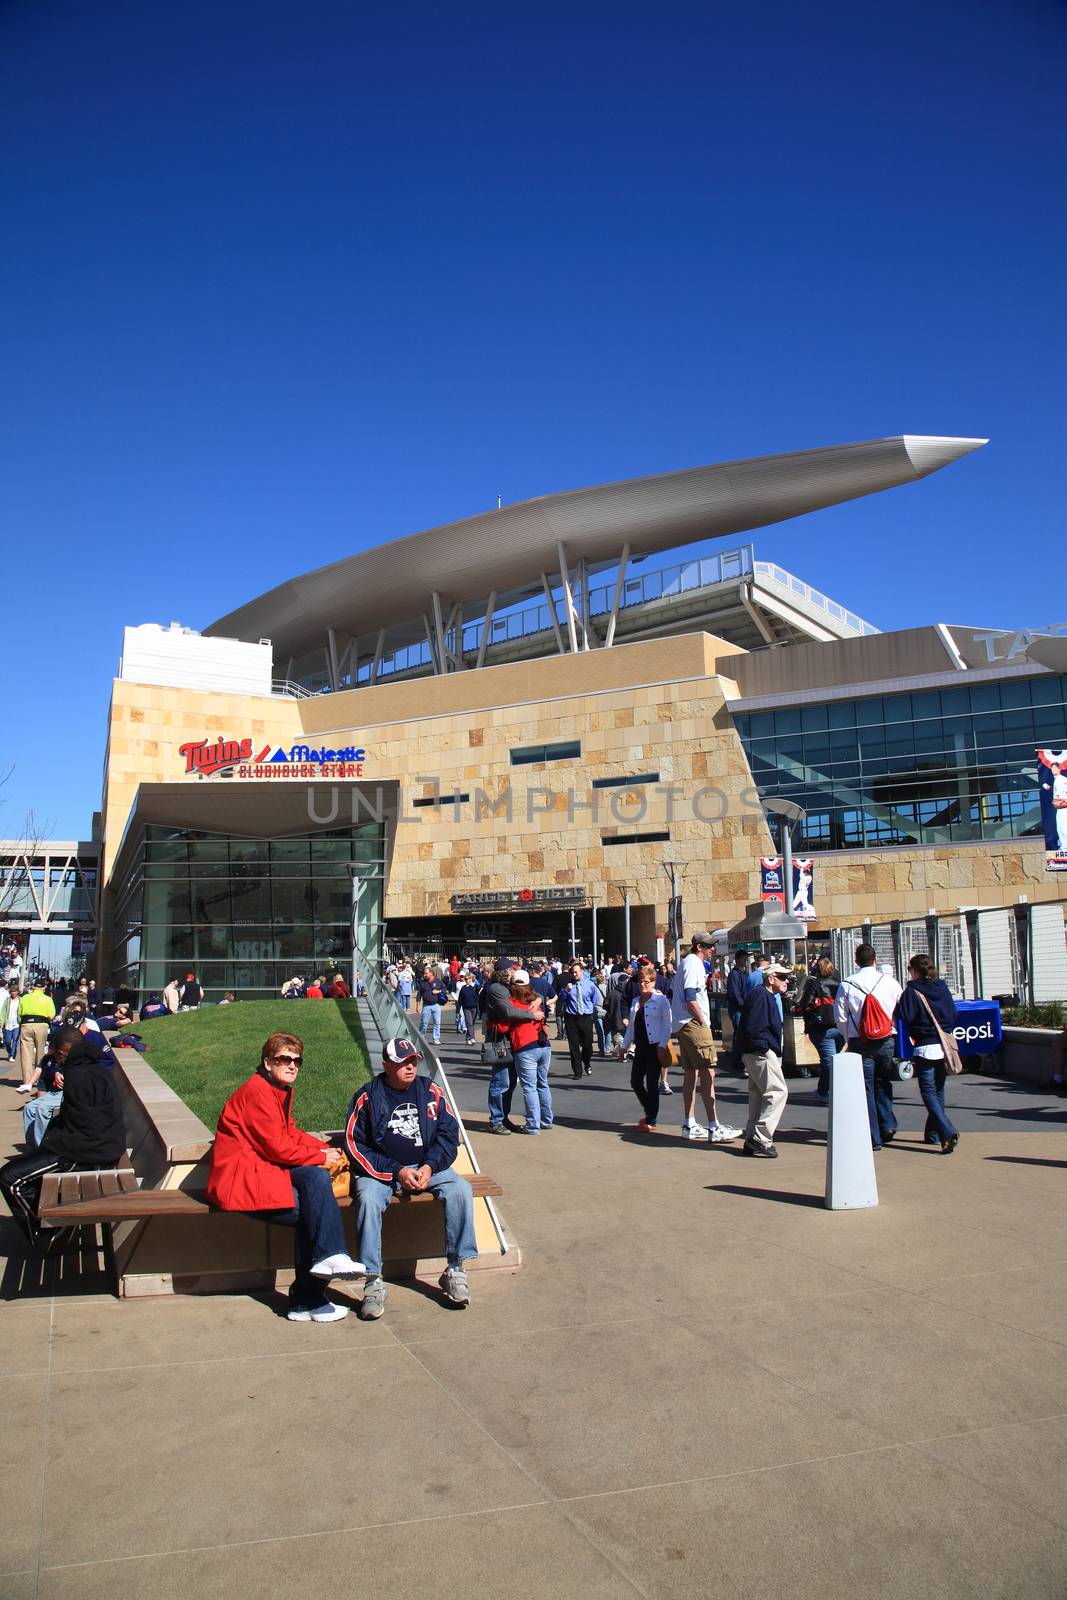 Target Field, ballpark of the Minnesota Twins in Minneapolis which returned outdoor baseball to the twin cities.